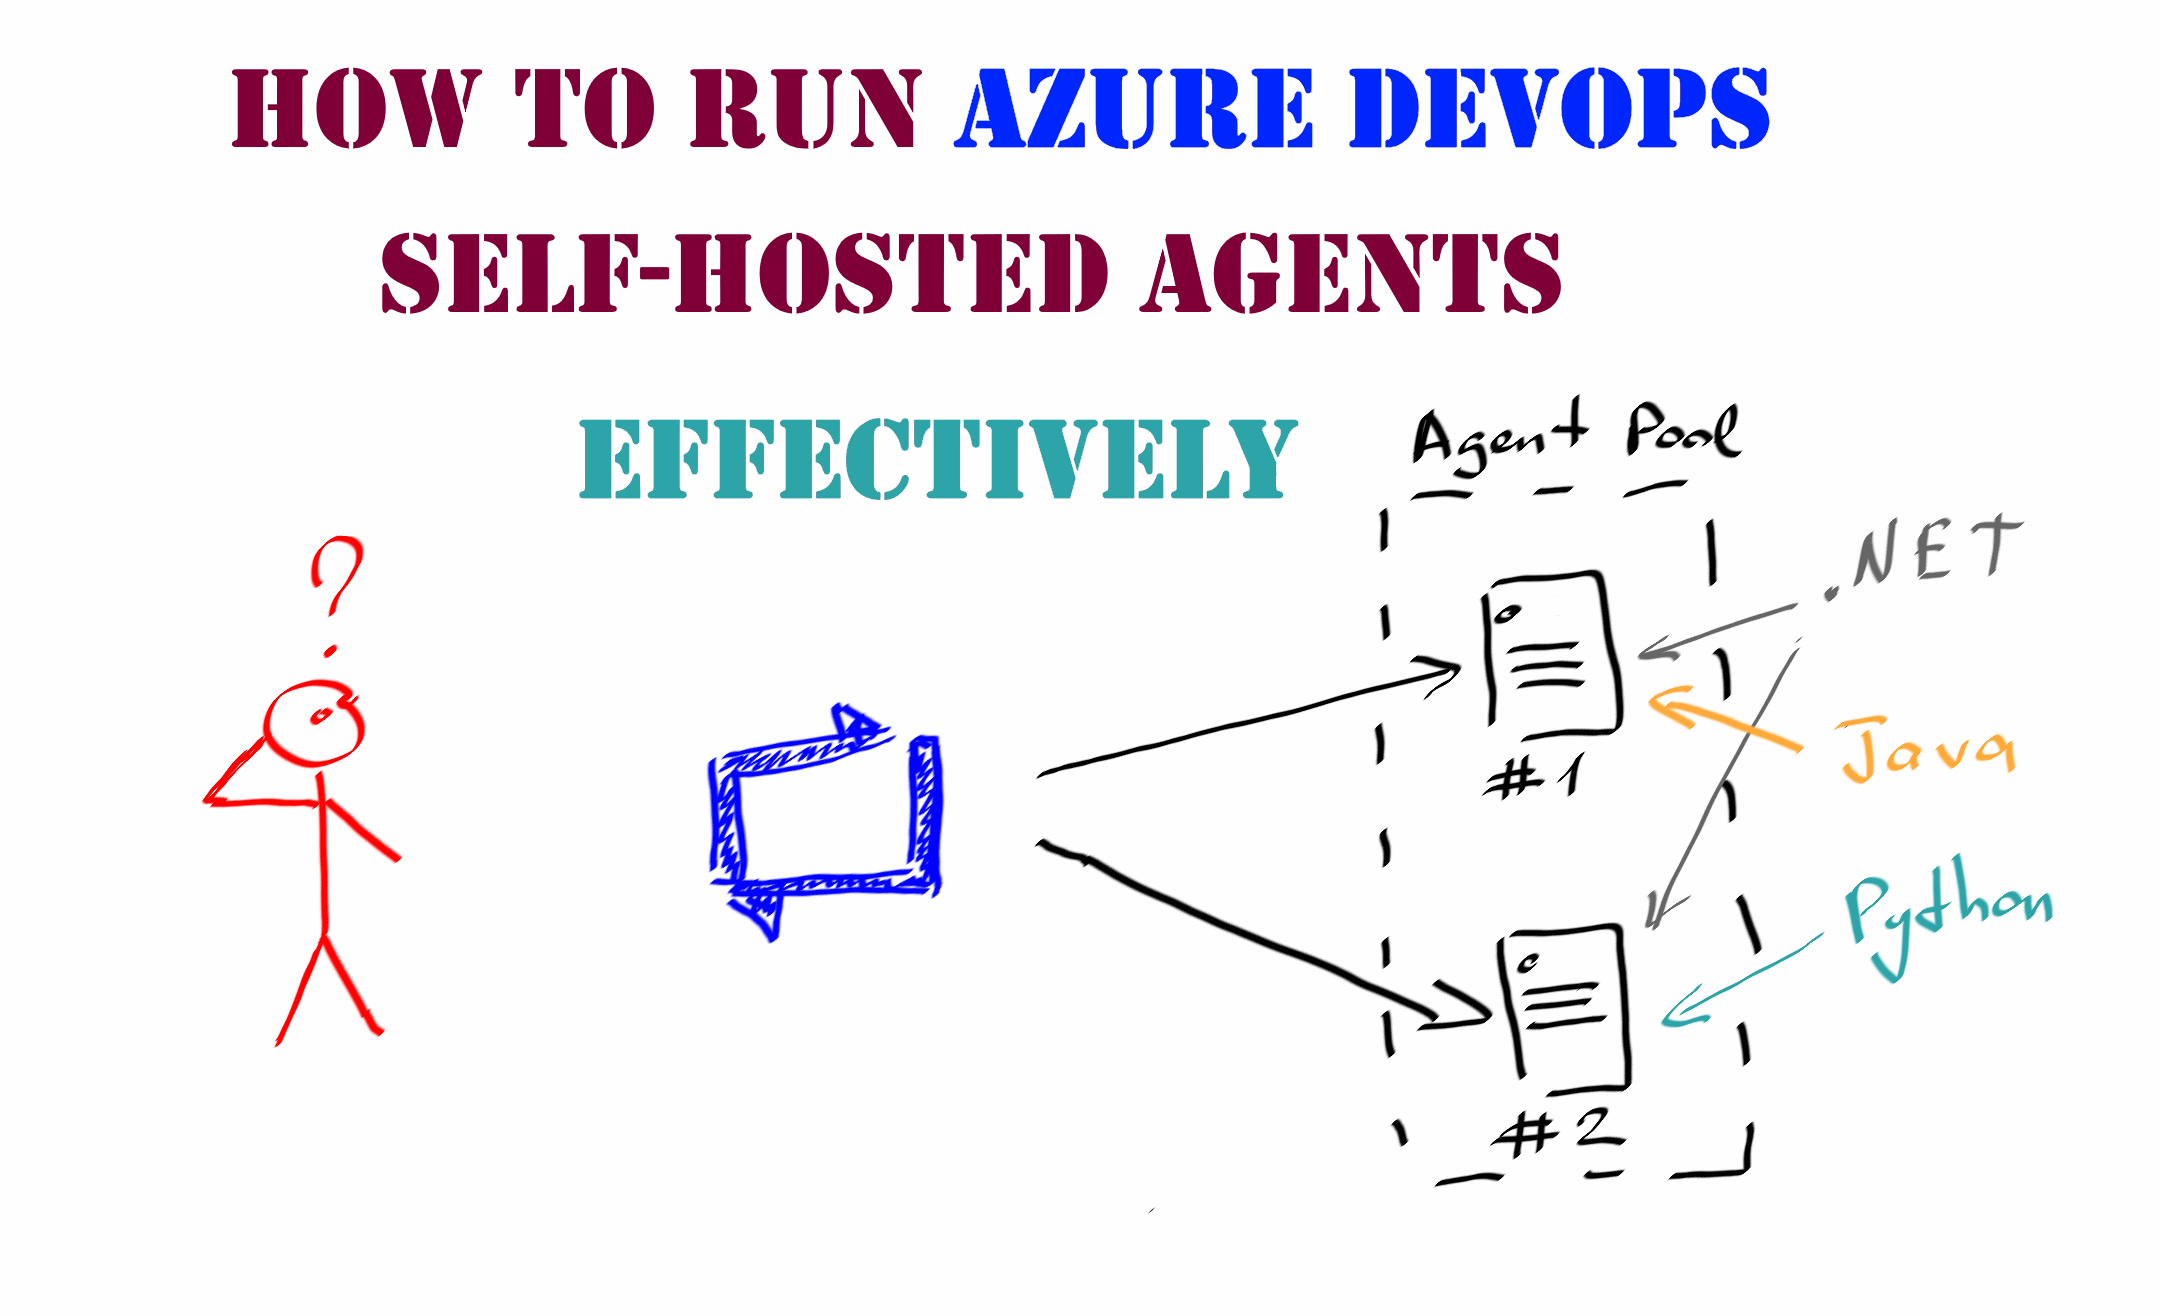 How to run Azure DevOps self-hosted agents effectively